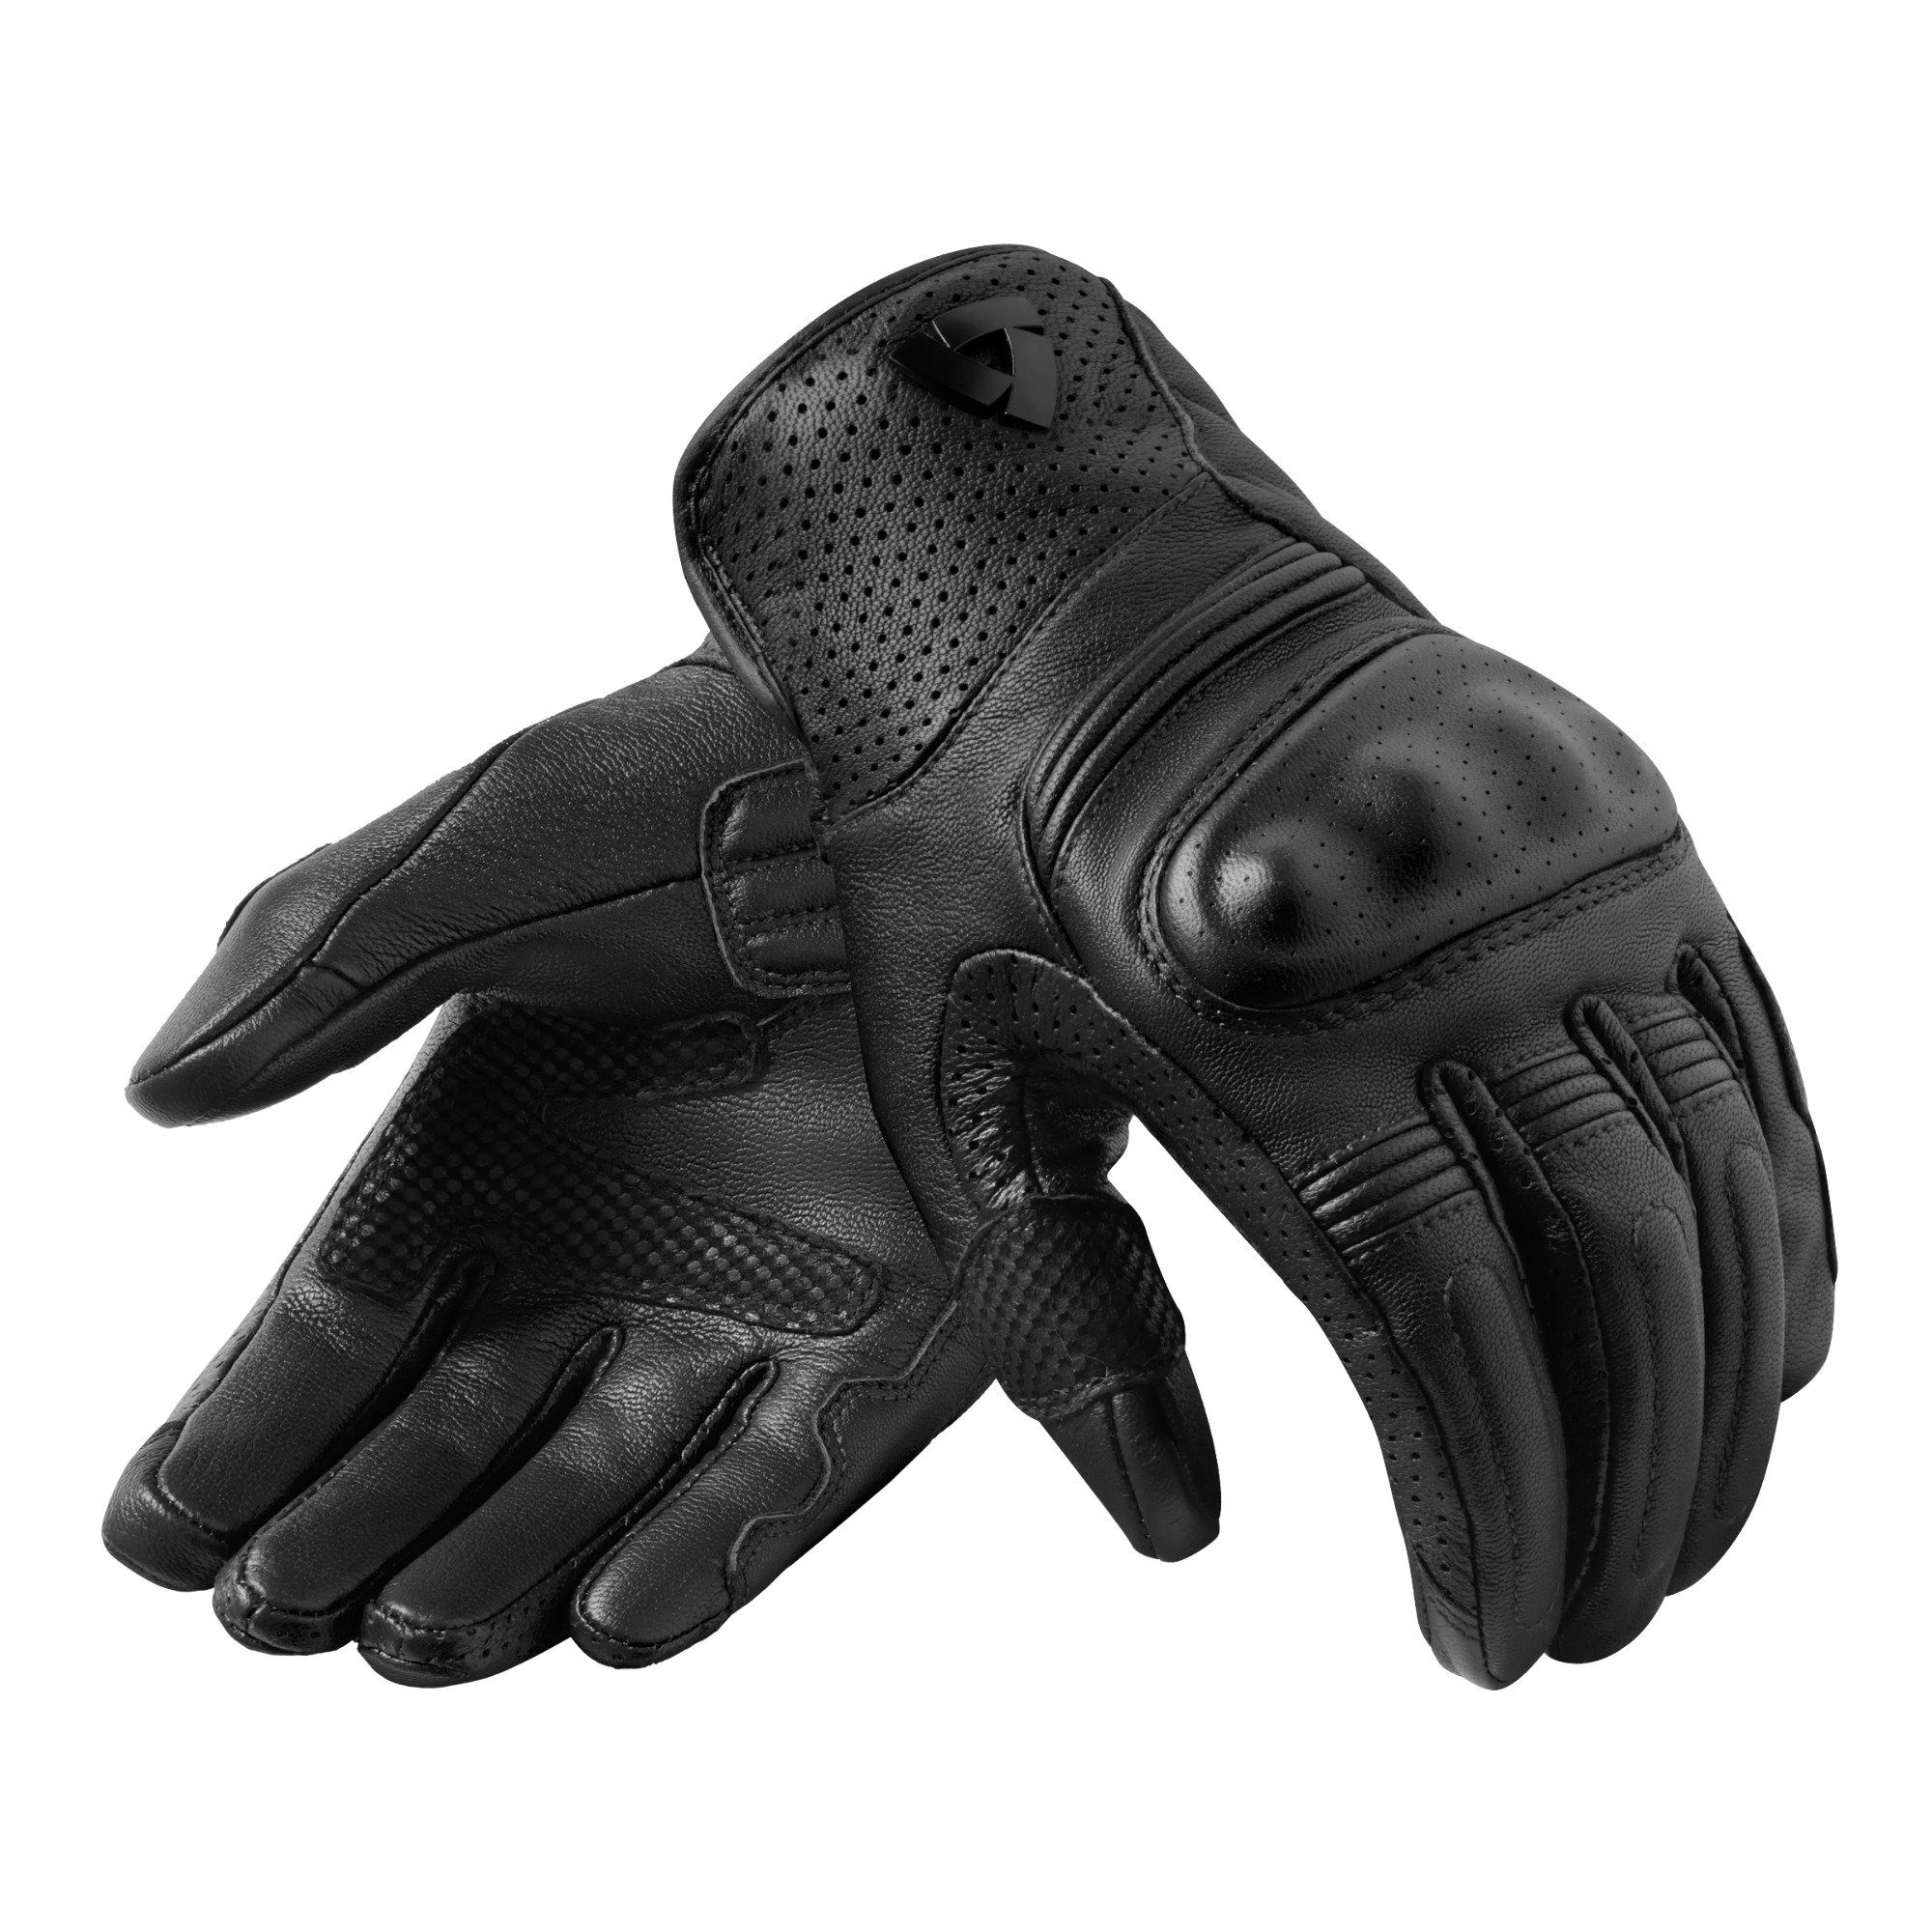 Image of REV'IT! Gloves Monster 3 Black Size 3XL ID 8700001360166